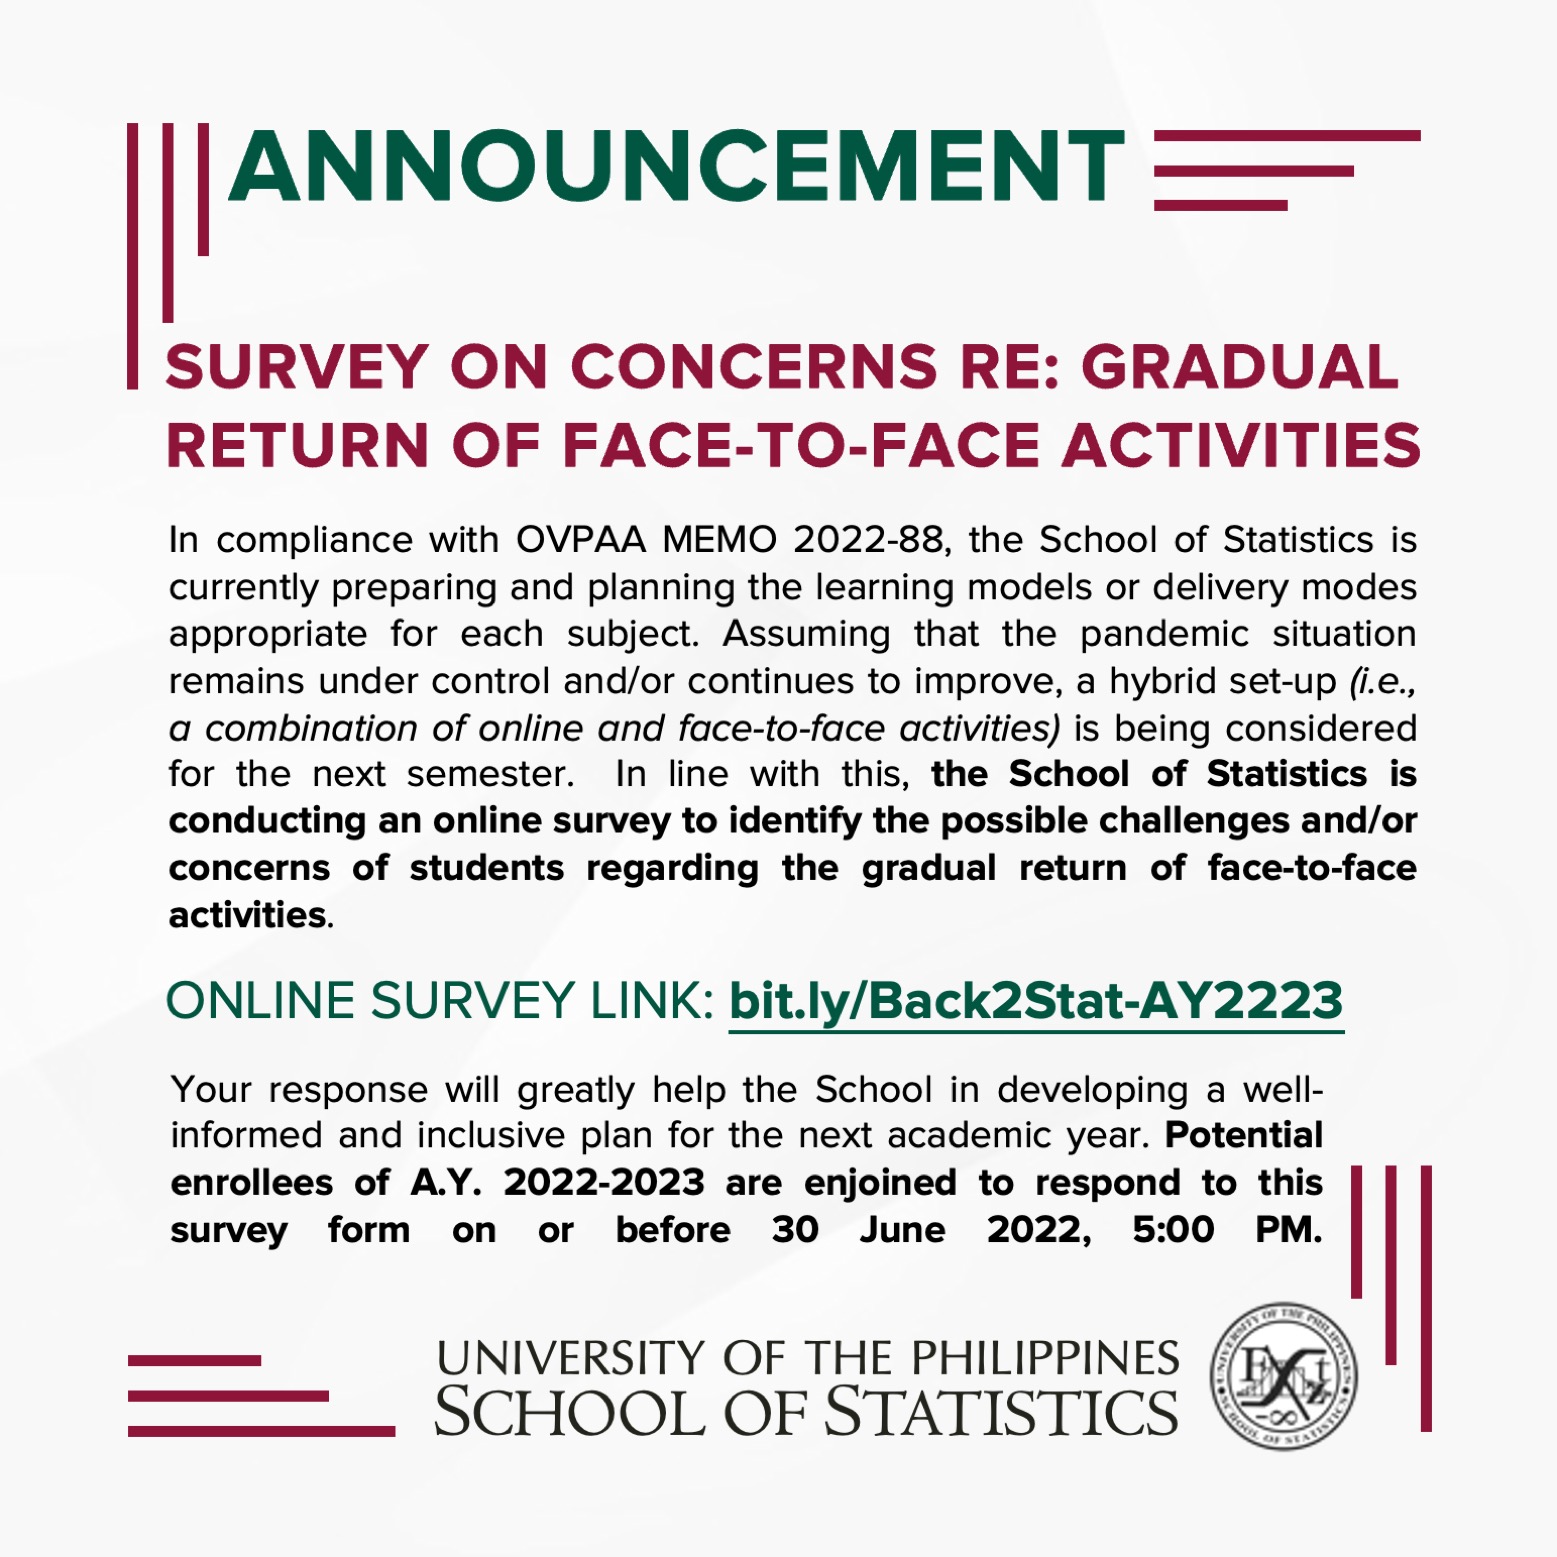 Image for Survey on Concerns re: Gradual Return of Face-to-Face Activities